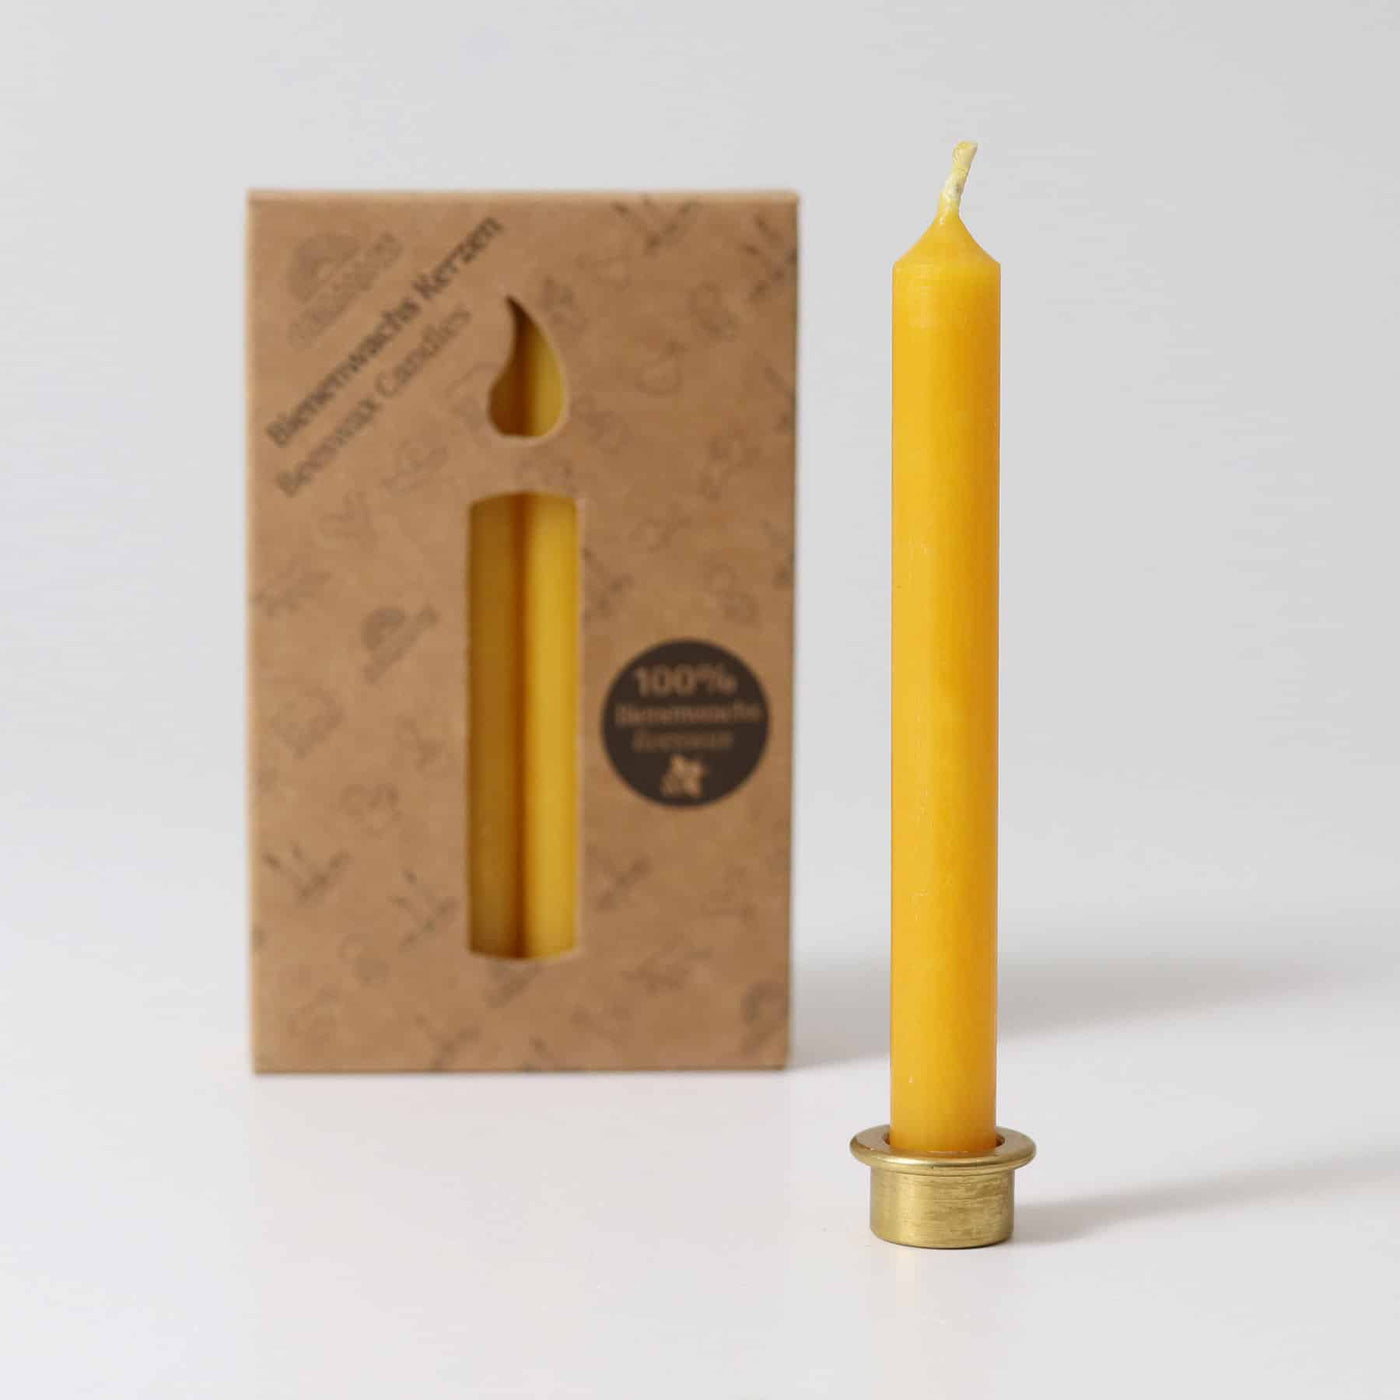 05101 Grimms Amber Beeswax Candles